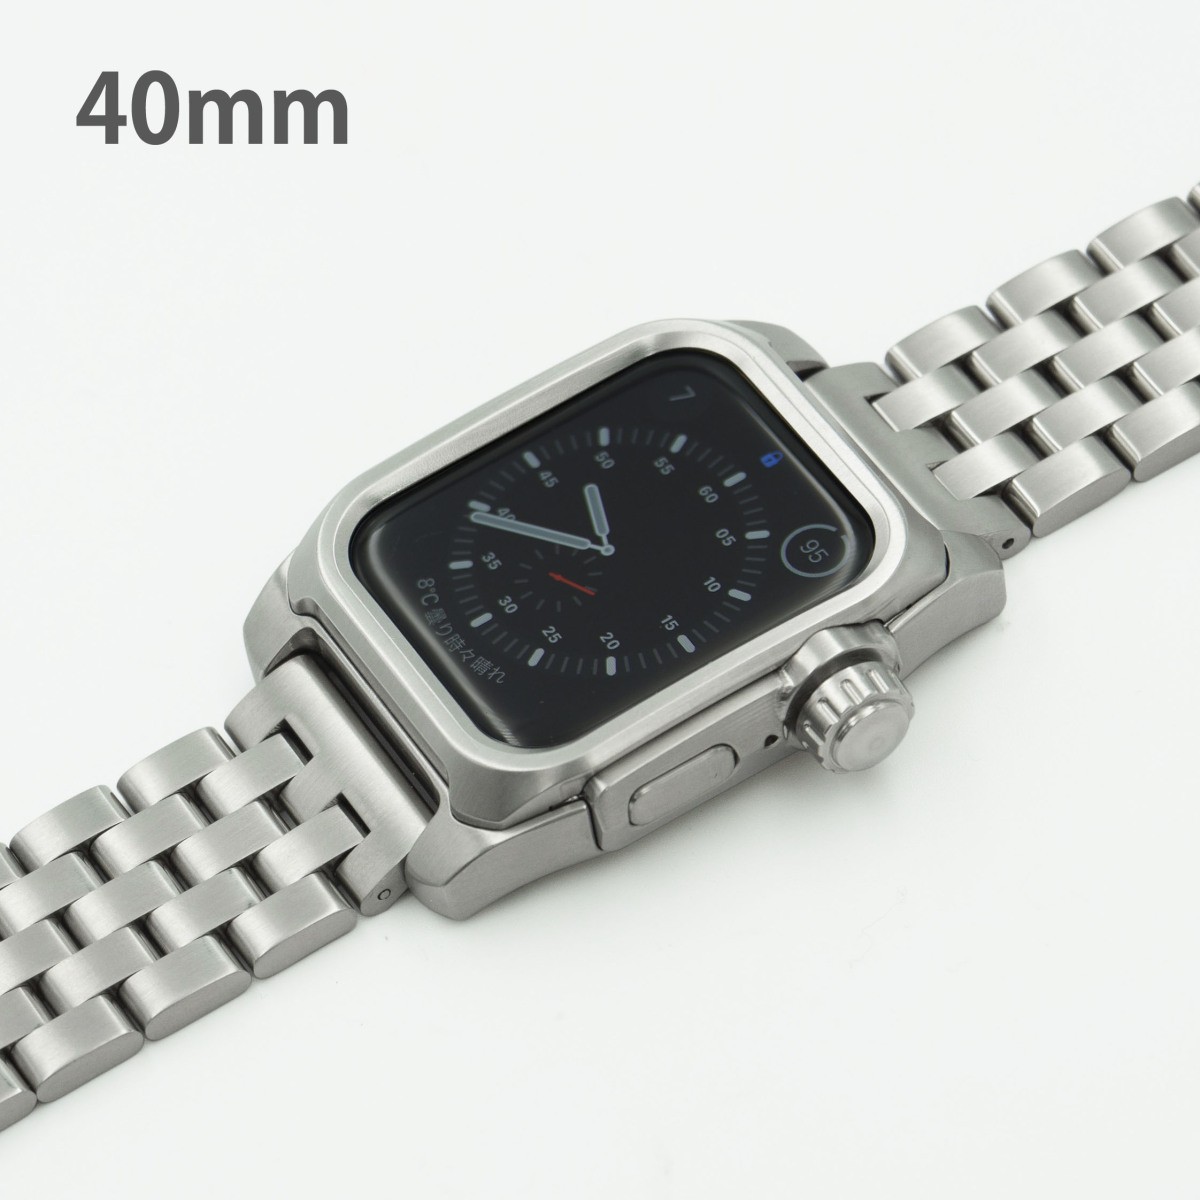  Apple watch 5&amp;4 40mm for FACTRON Next for AppleWatch5 stainless steel 316L case stainless steel metal band Series5&amp;4 40mm exclusive use FA-W-043